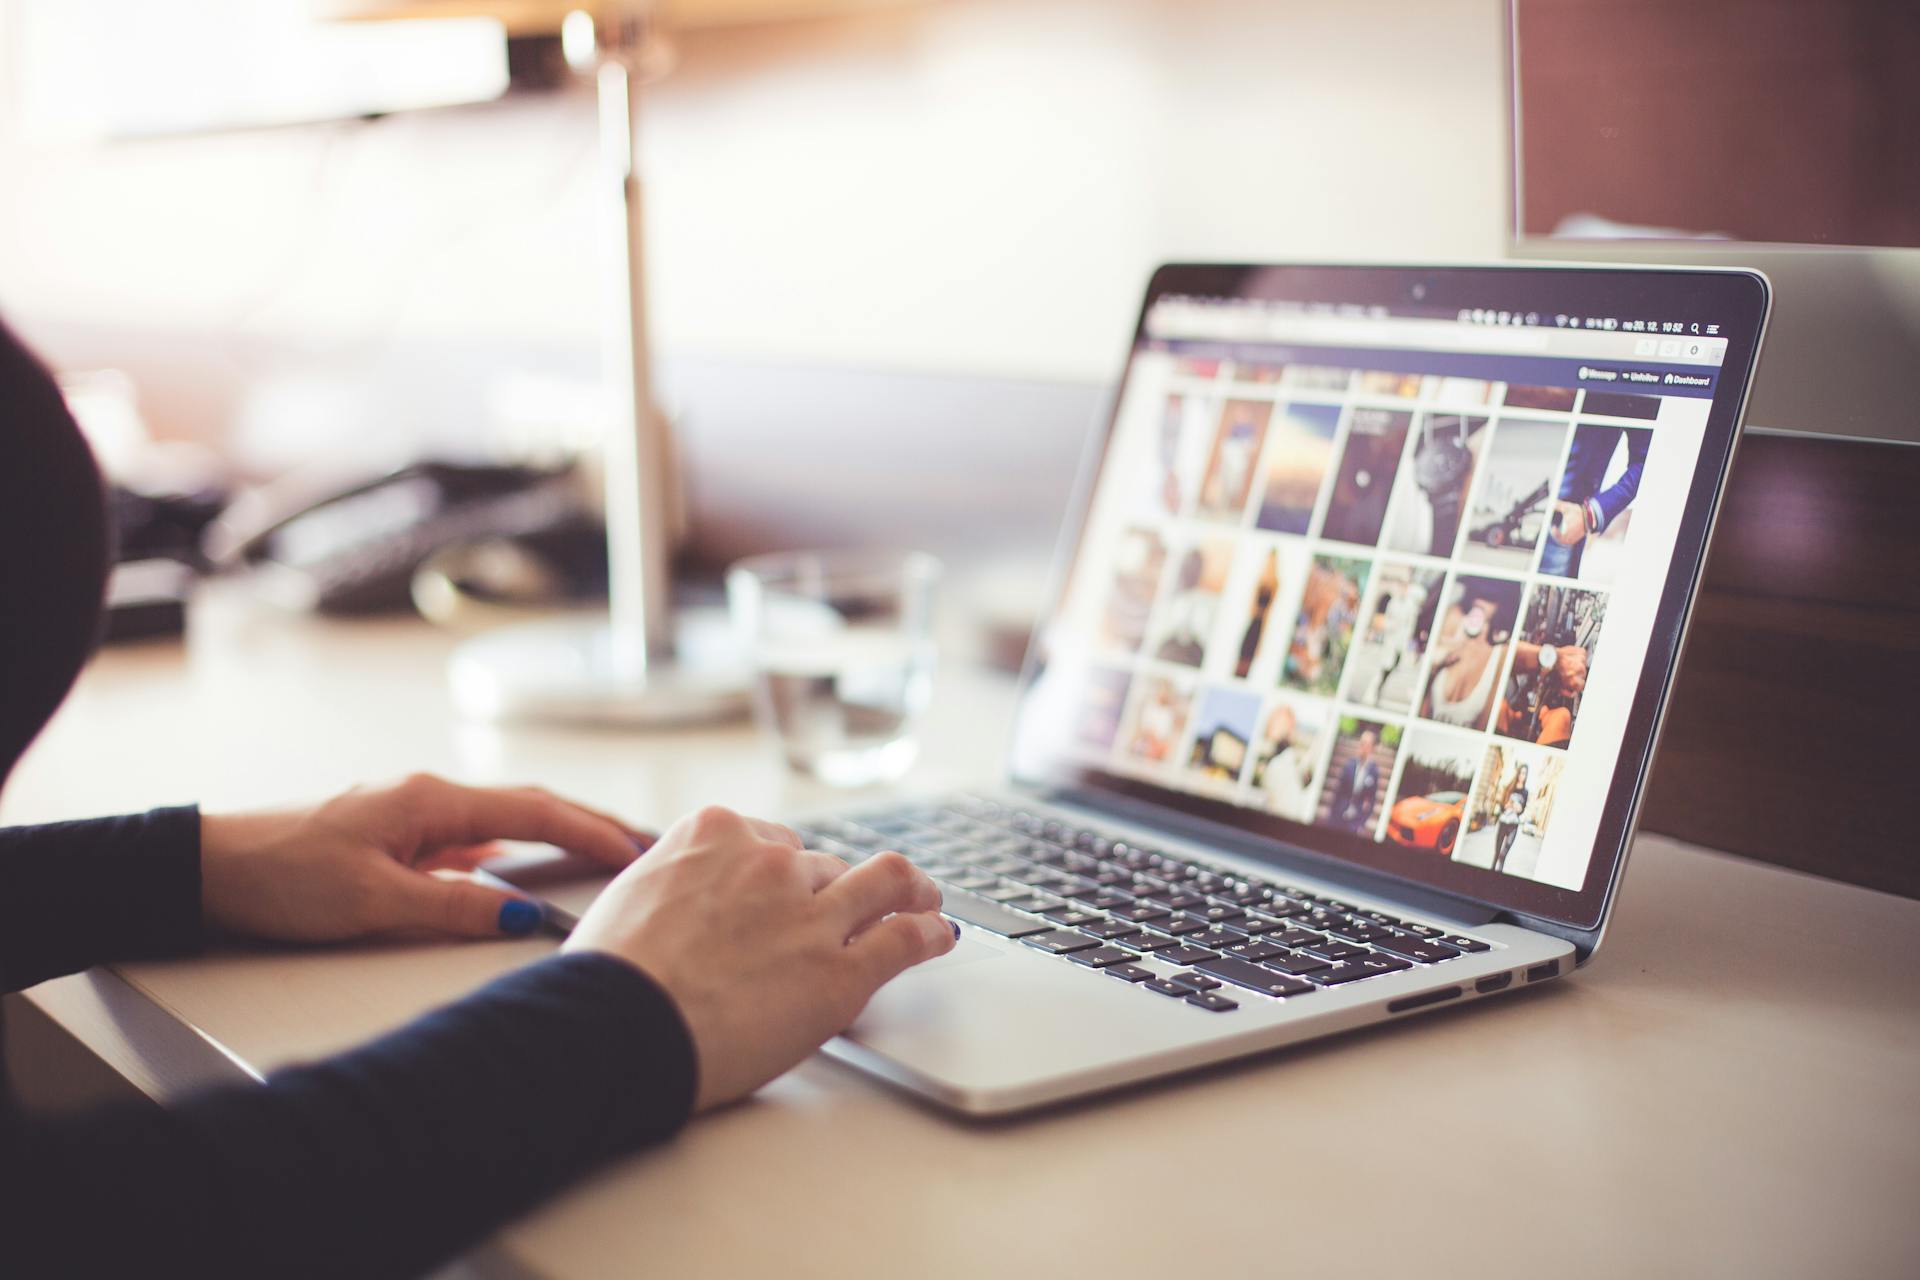 A person using a laptop to view photos on social media | Source: Pexels